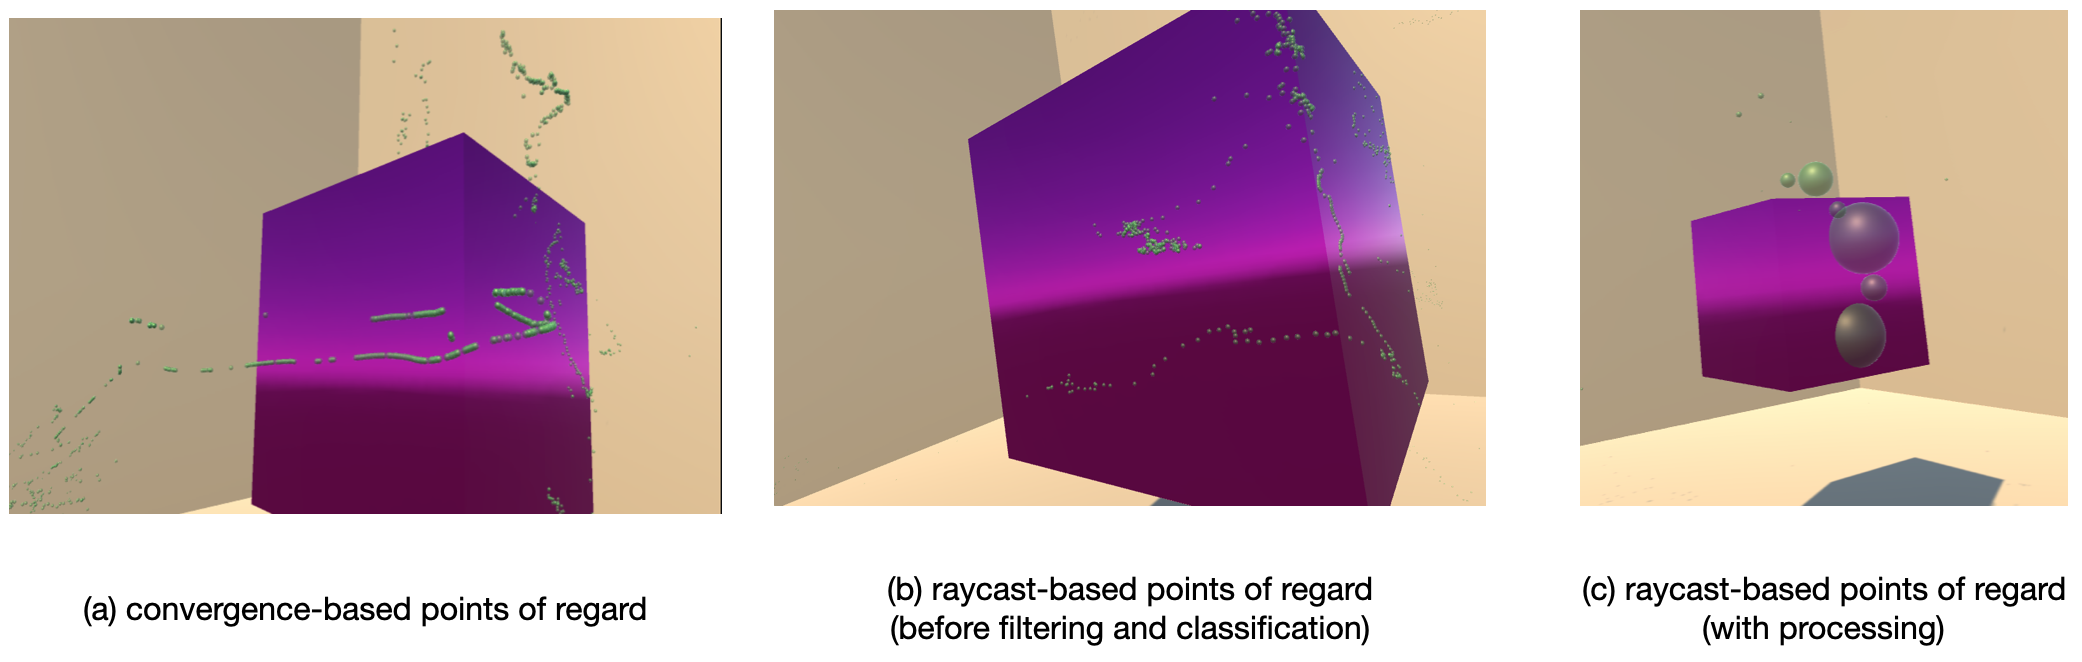 The figure features a scene of a cube in three configurations from the three variations of gaze processing techniques described in the caption. The first cube has granular gaze points mostly floating in the air around the cube. The second cube has granular gaze points falling on the cube and walls. The third aggregated gaze points of varying size around the cube.